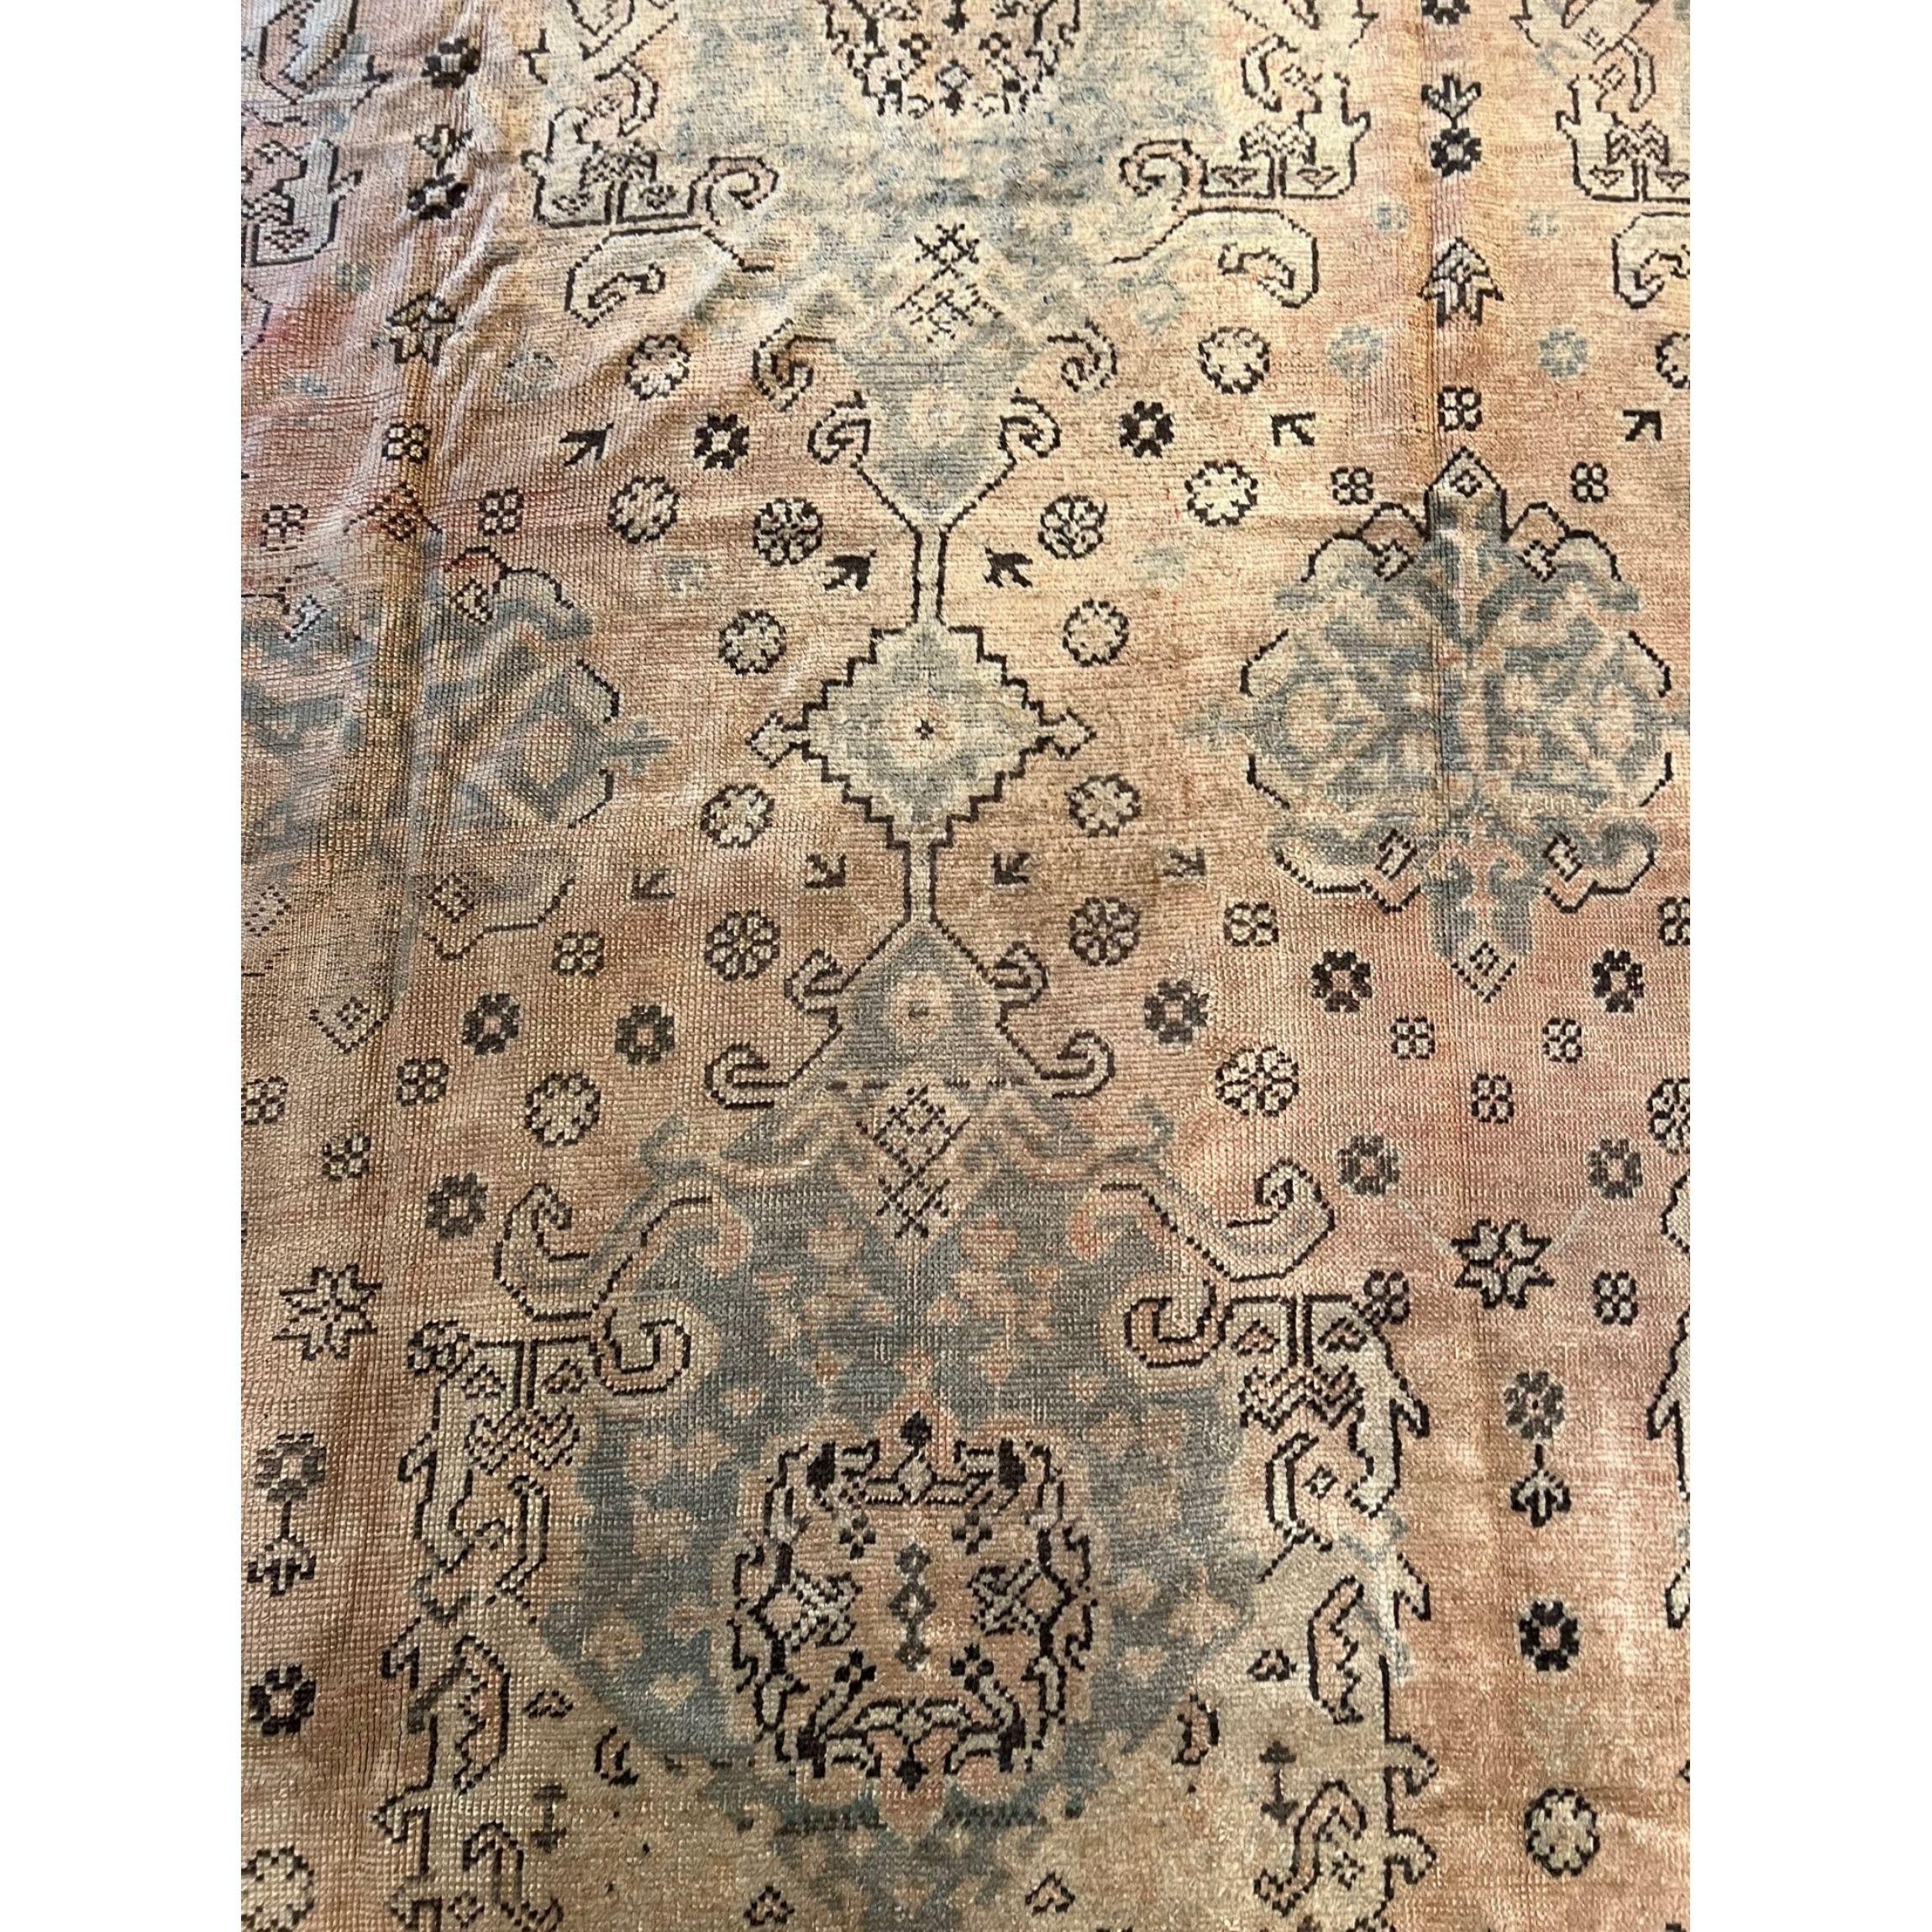 Antique Oushak Rug 12.7x10.2 In Good Condition For Sale In Los Angeles, US